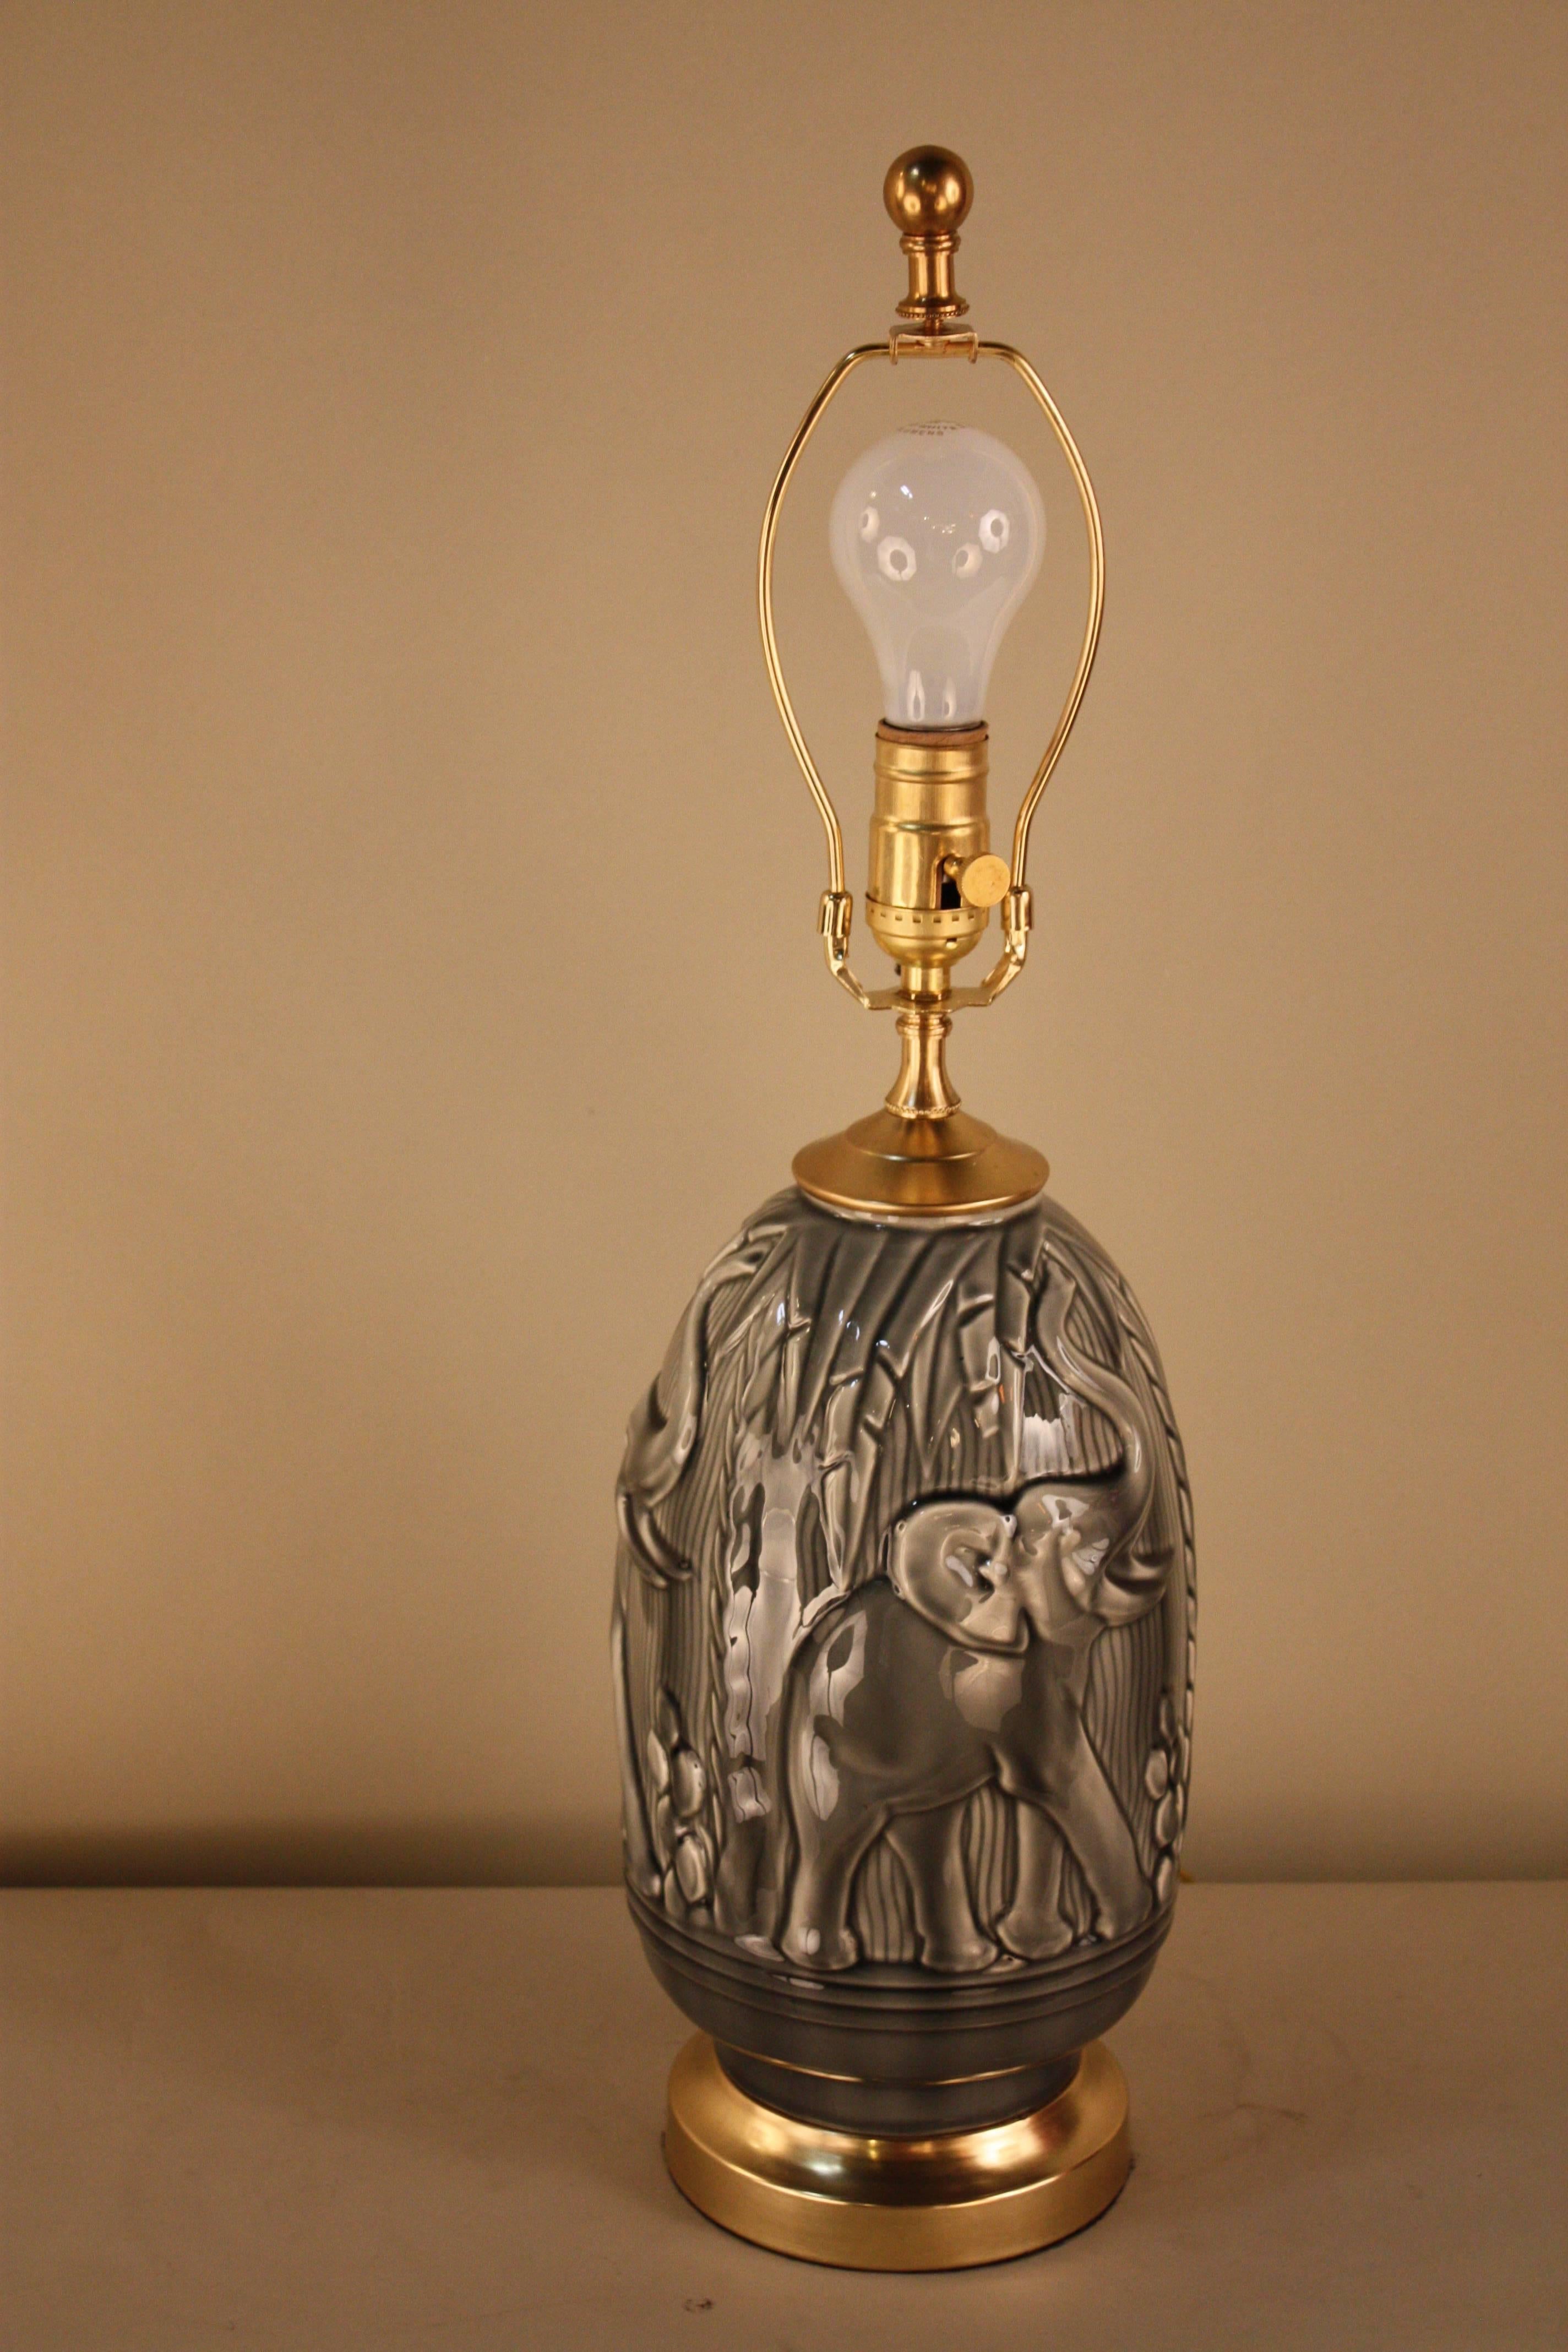 Elegant high glazed gray pottery table lamp with running elephant motif.